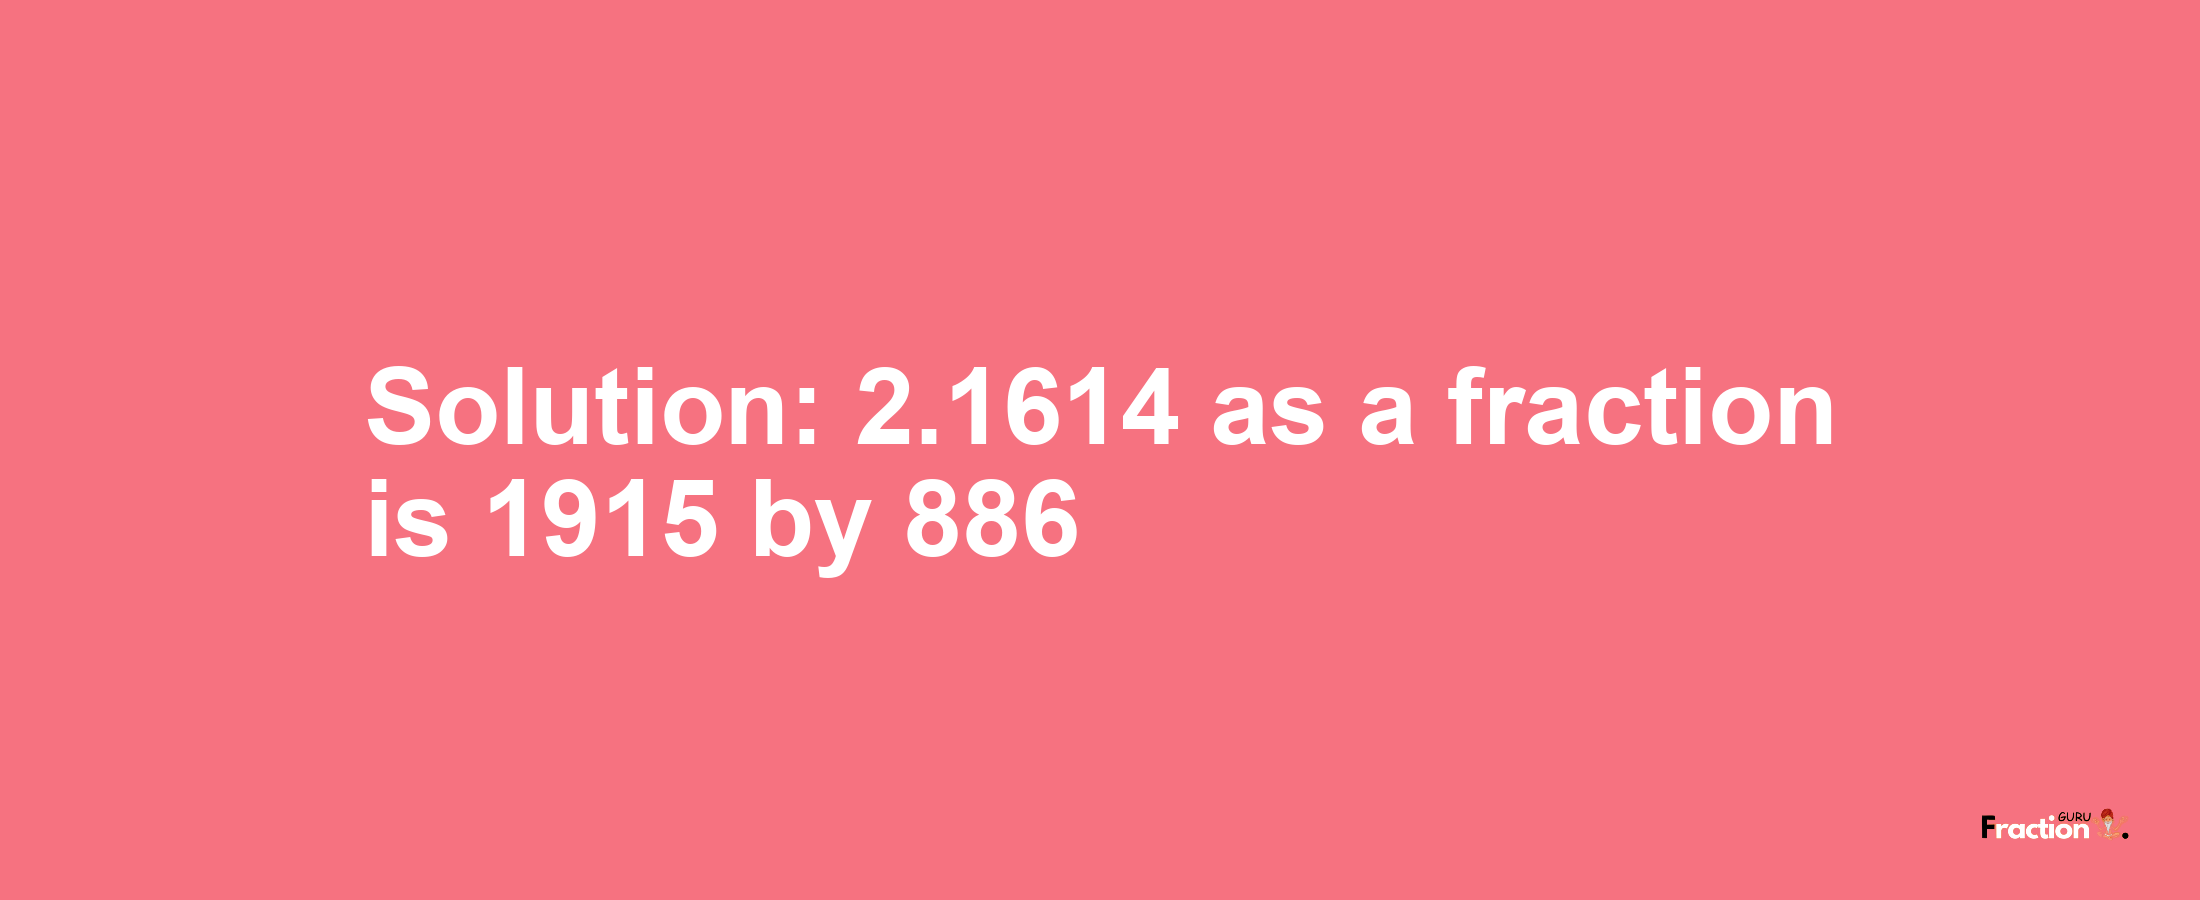 Solution:2.1614 as a fraction is 1915/886